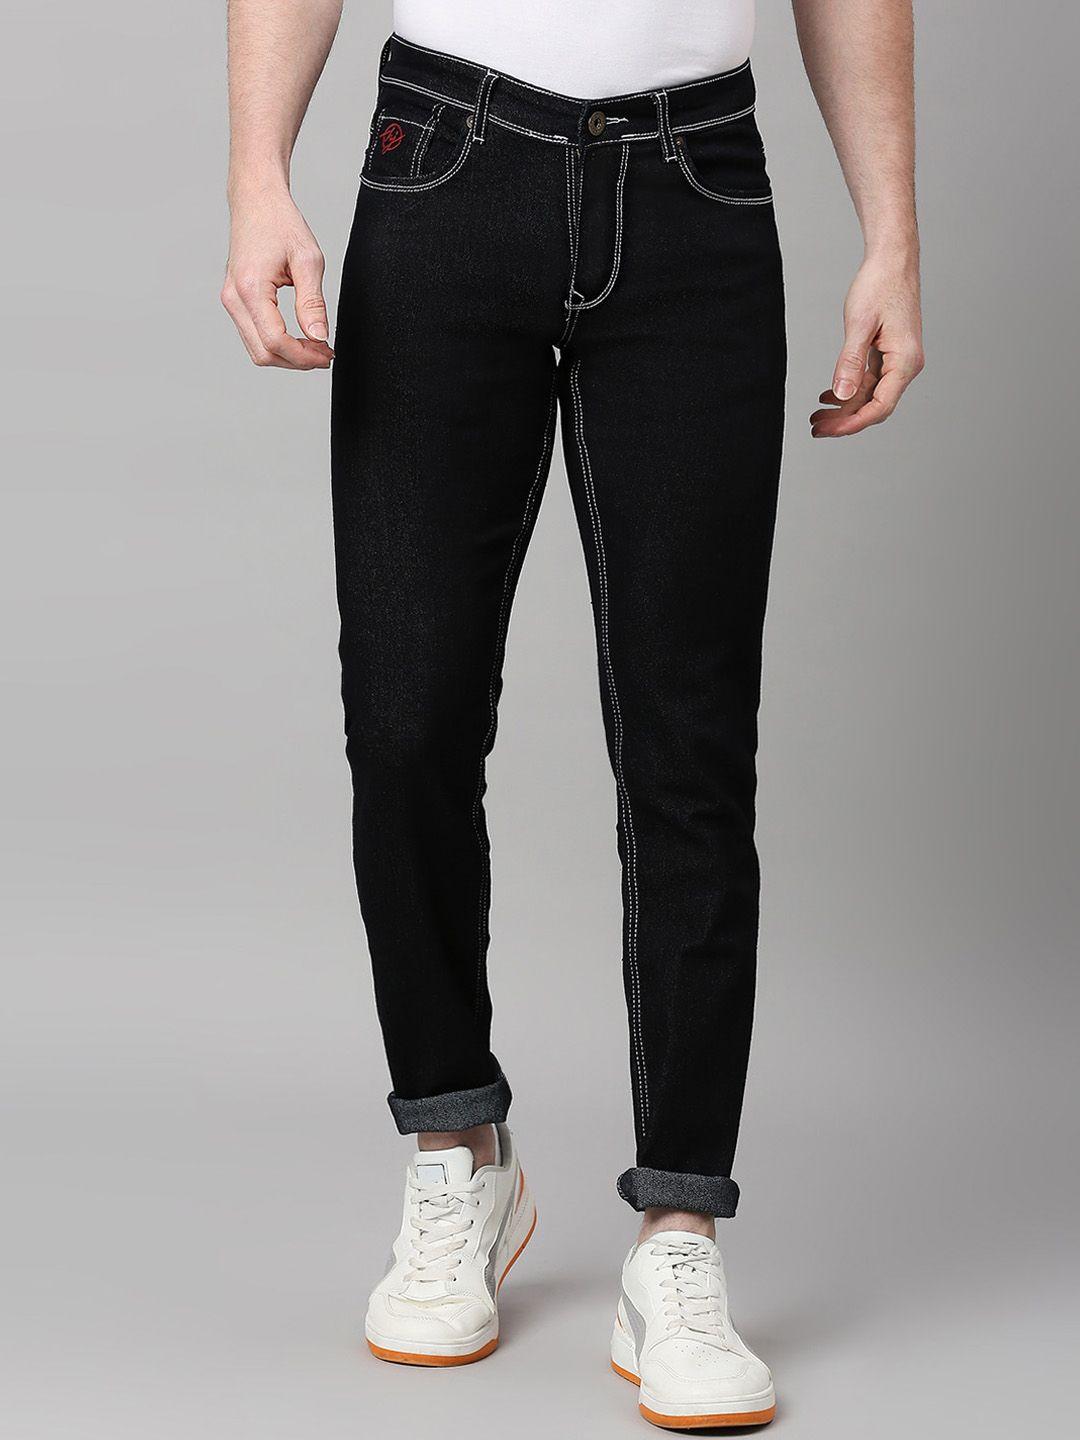 hj hasasi men slim fit stretchable jeans